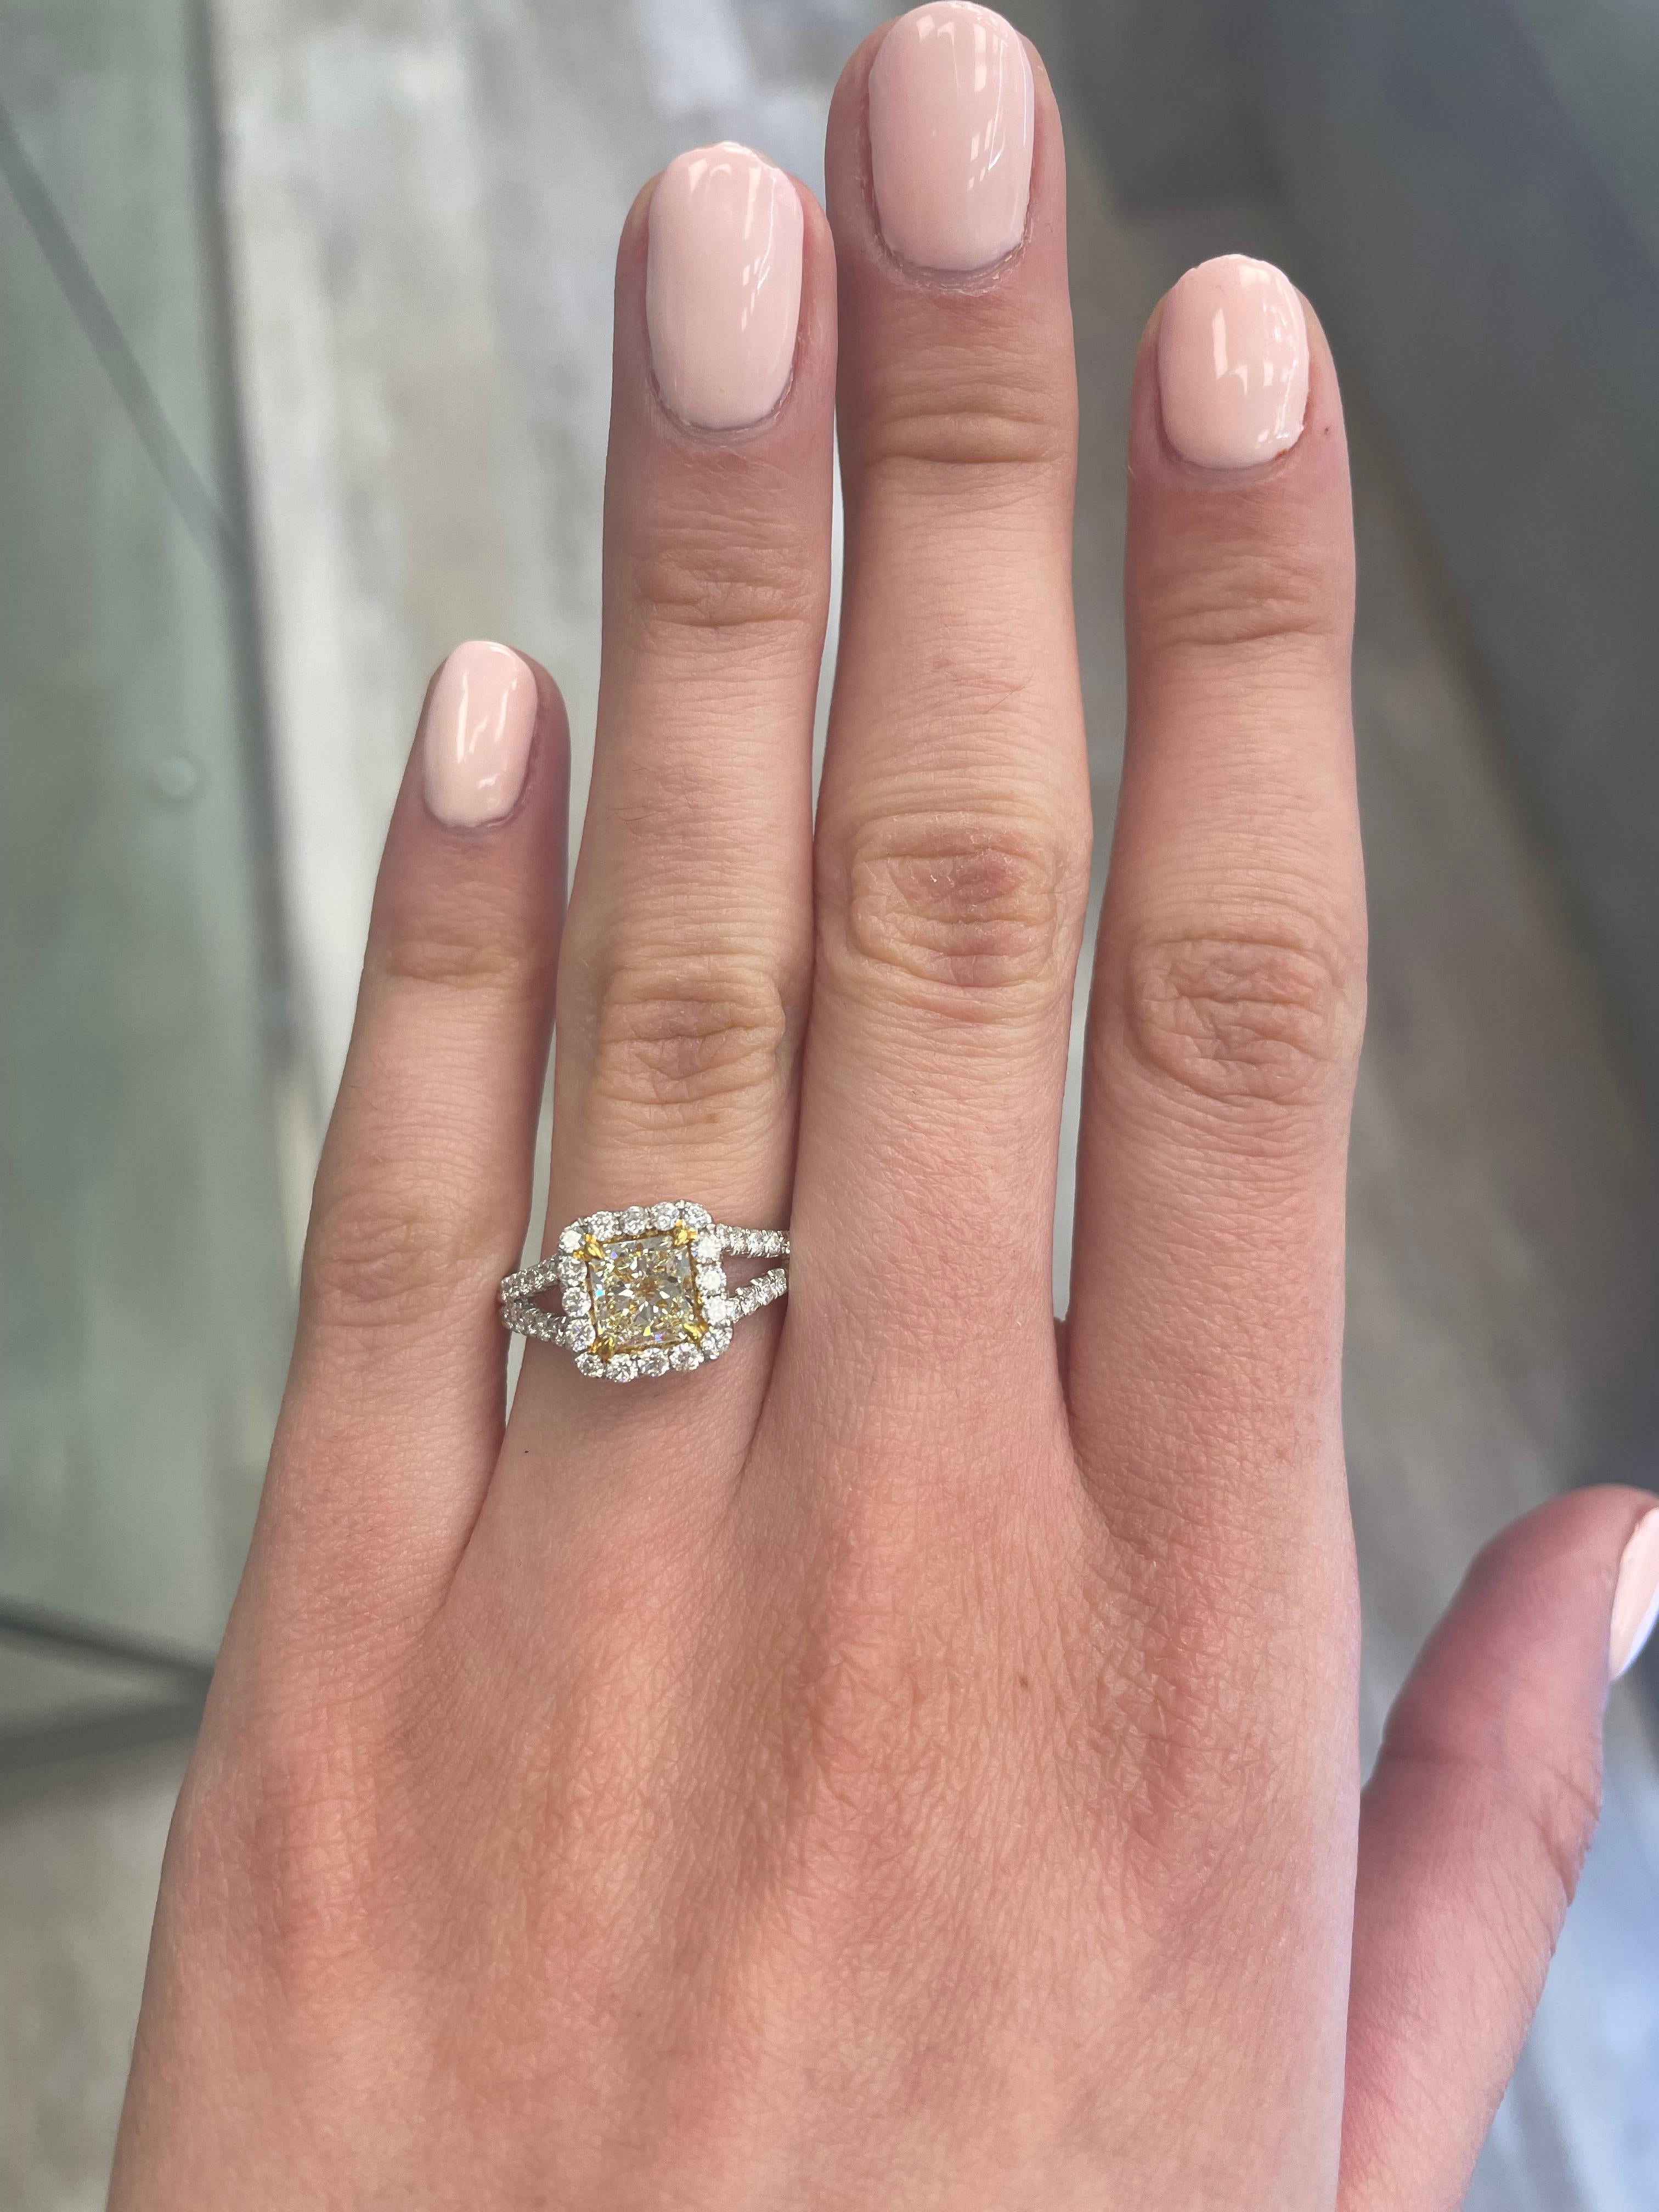 Stunning modern EGL certified yellow diamond with halo ring, two-tone 18k yellow and white gold. By Alexander Beverly Hills
1.70 carats total diamond weight.
1.11 carat radiant cut Fancy Light Yellow color and VVS2 clarity diamond, EGL graded.